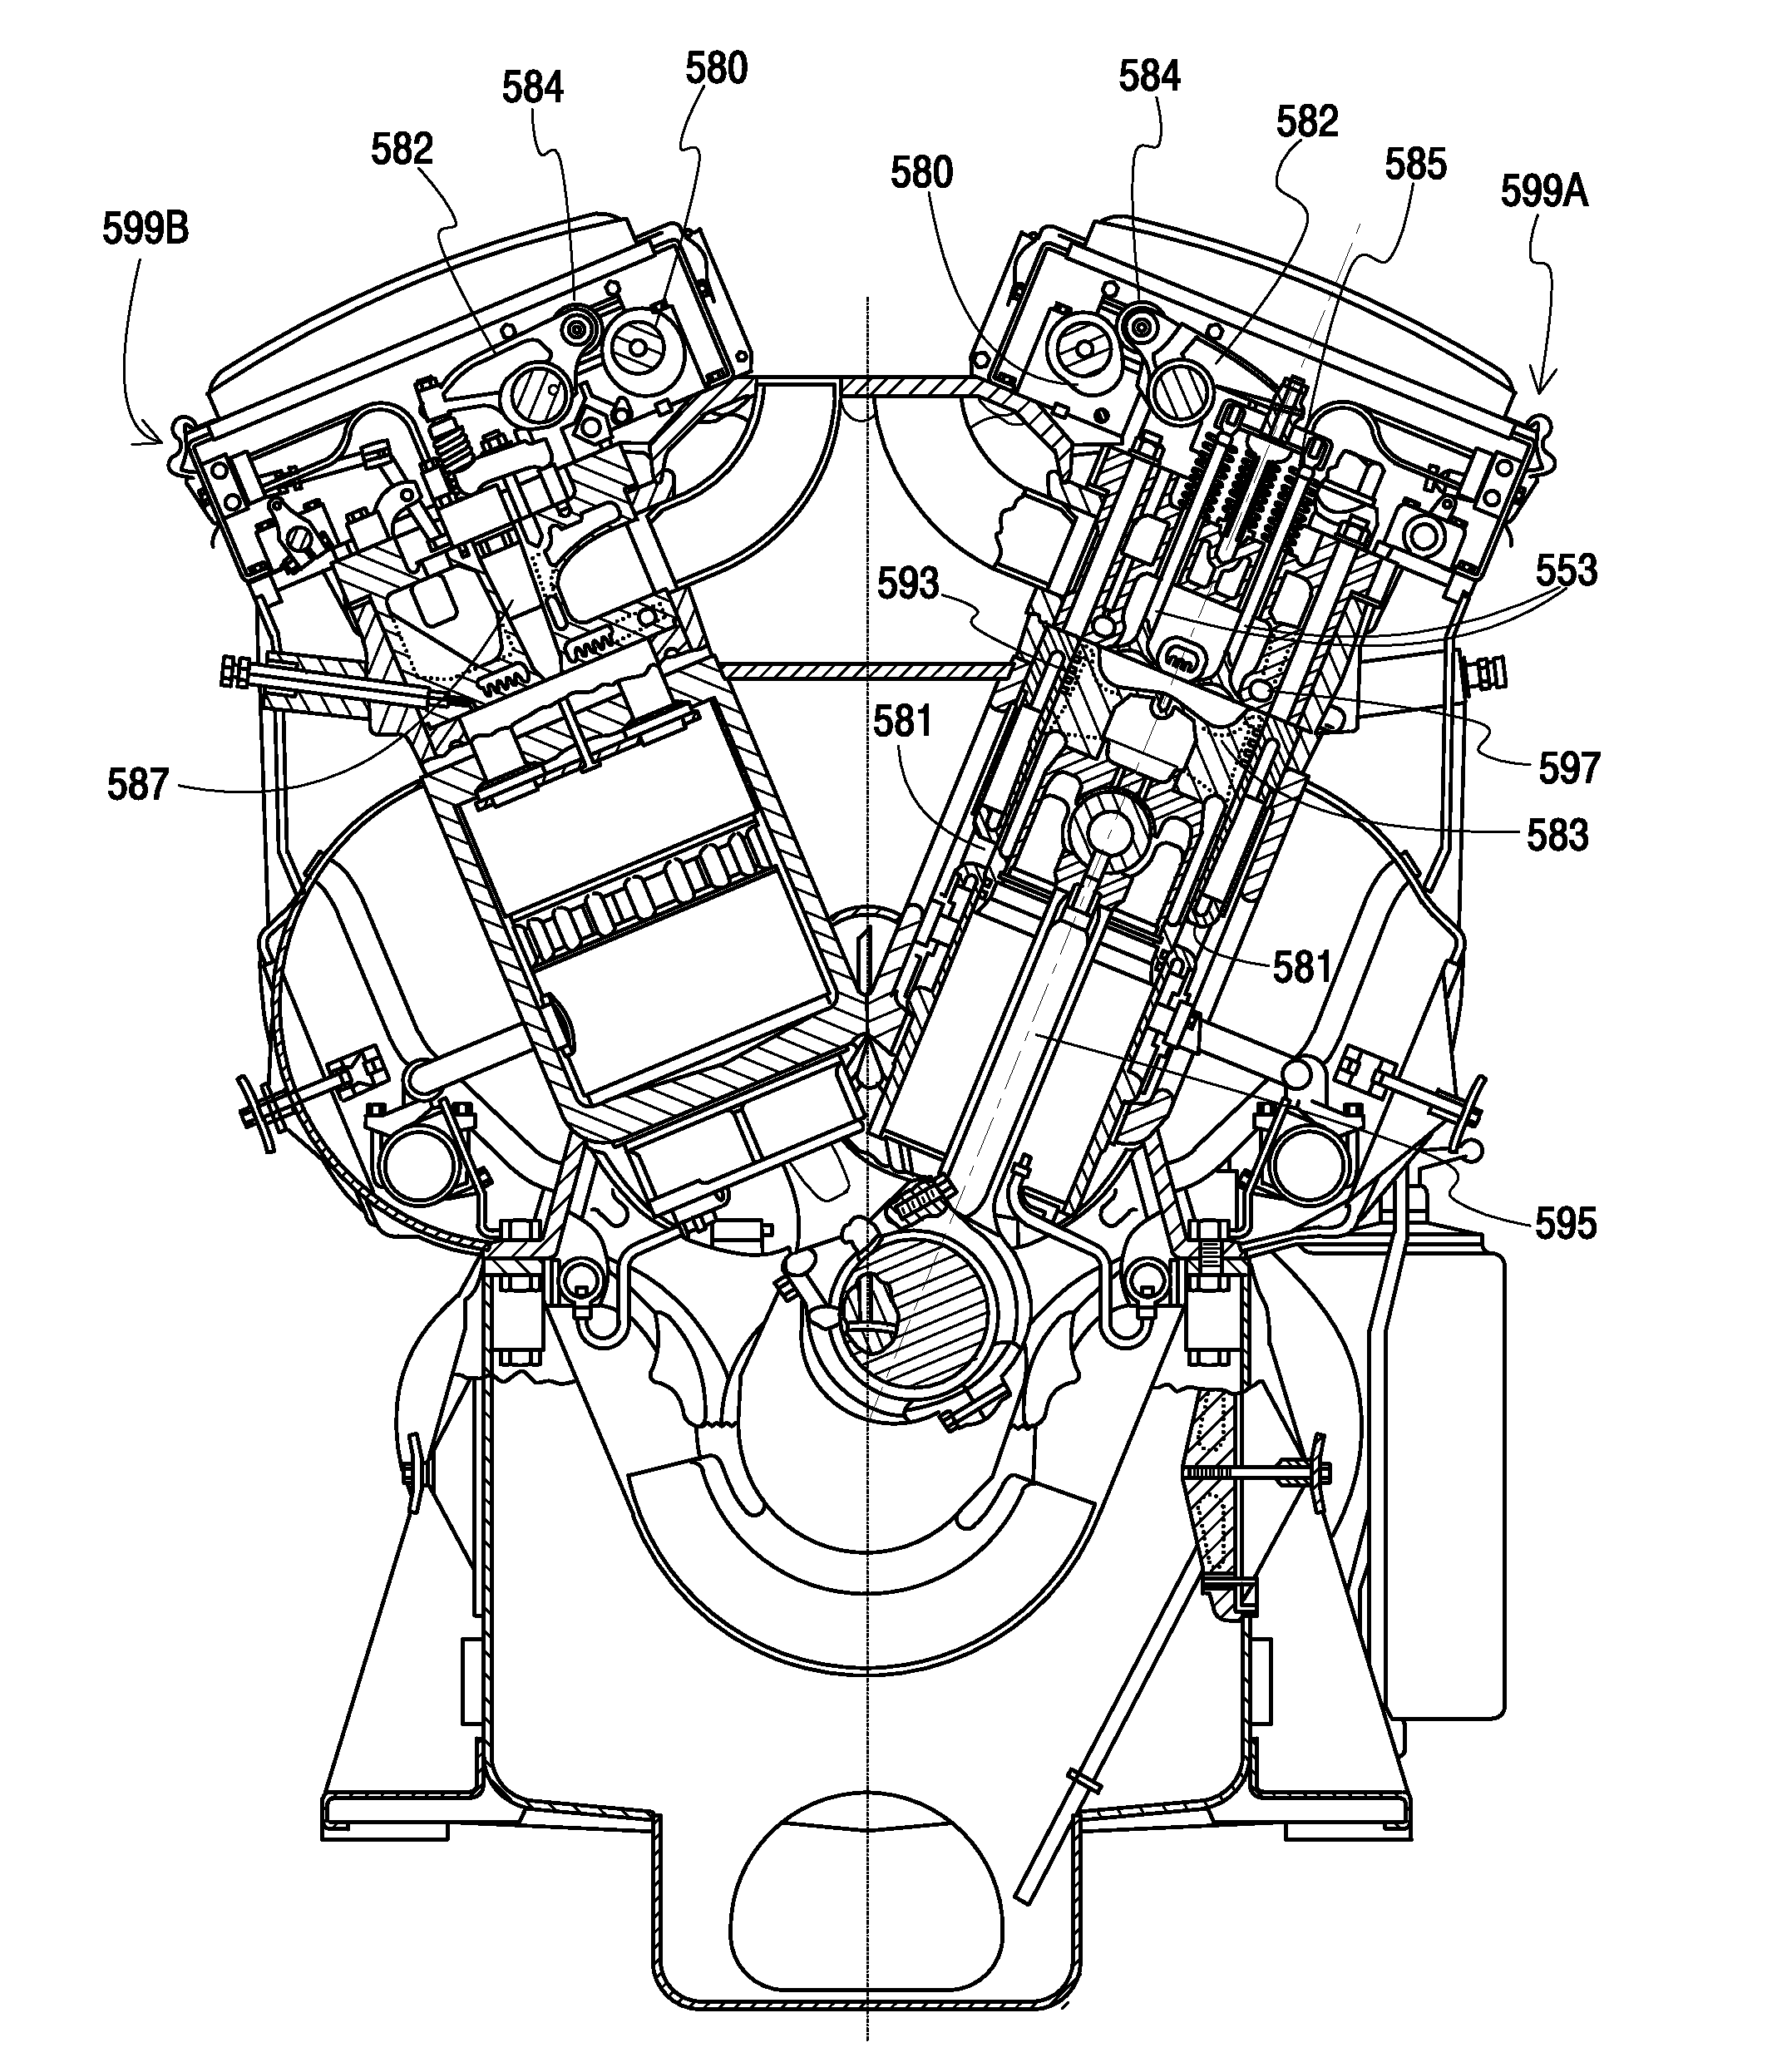 Engine exhaust valve timing and lift system for a two-stroke locomotive diesel engine having an egr system